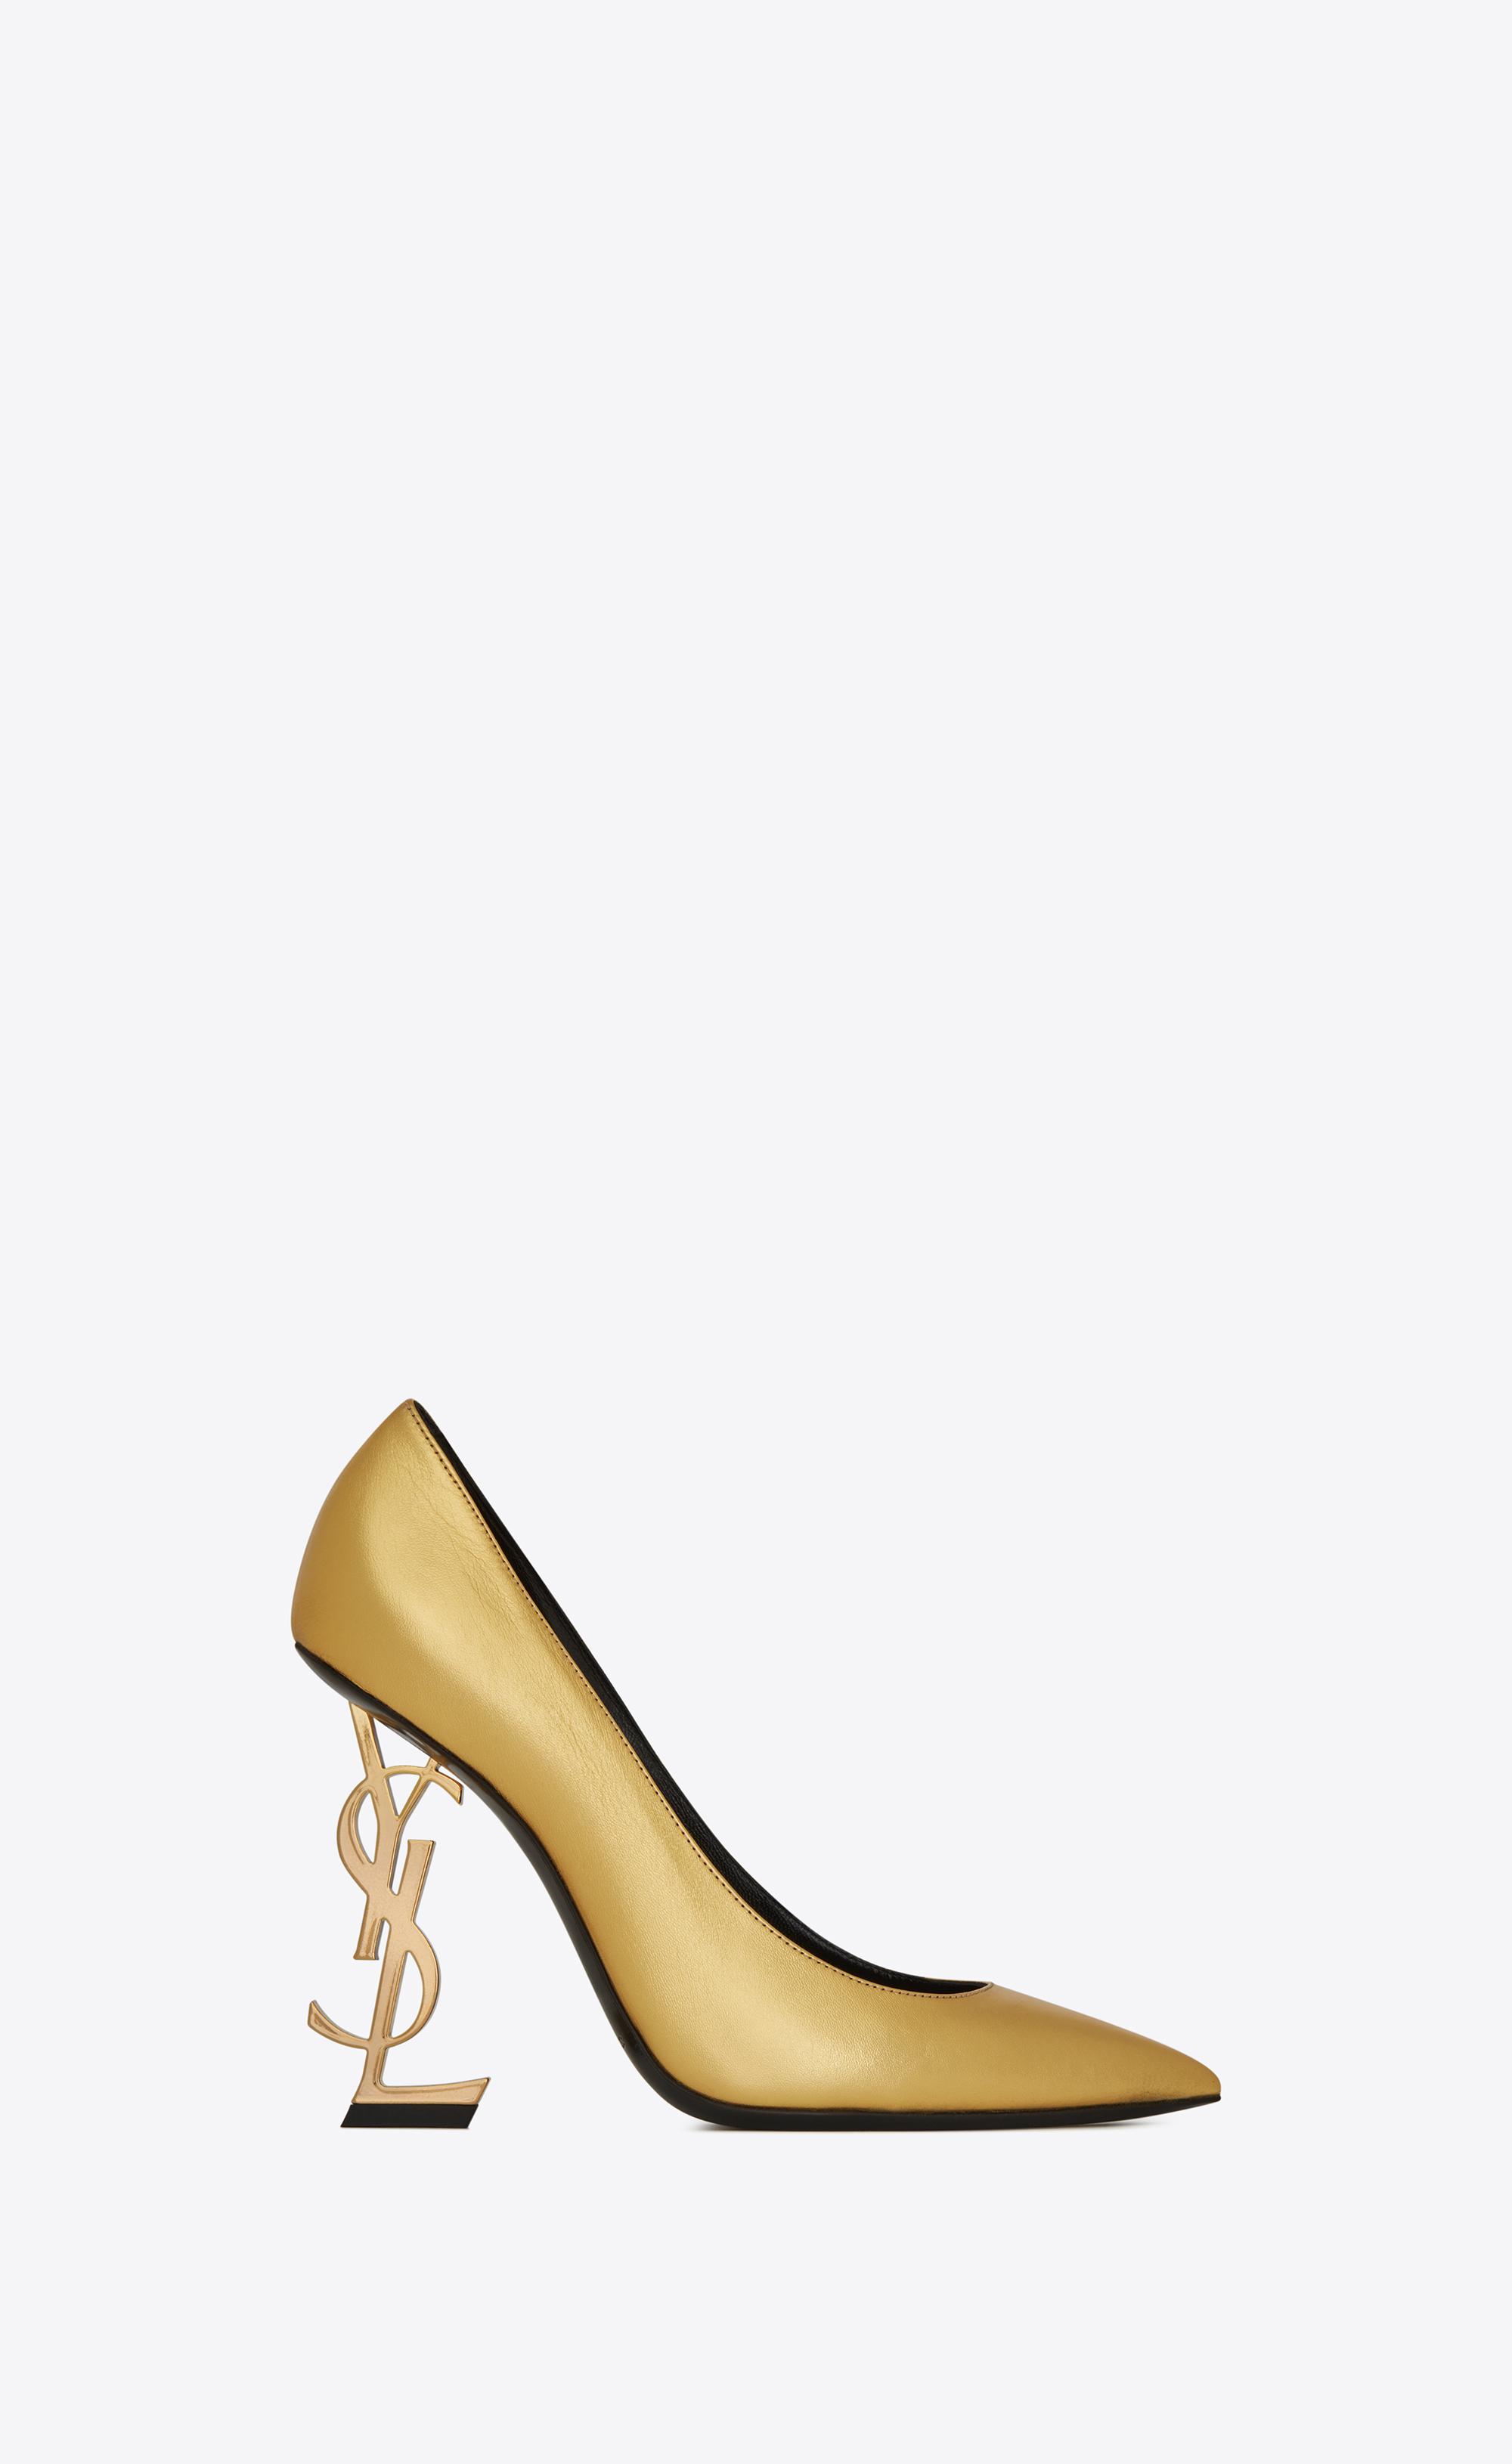 Saint Laurent Opyum Pumps With Gold-toned Heel In Smooth Leather in  Metallic | Lyst